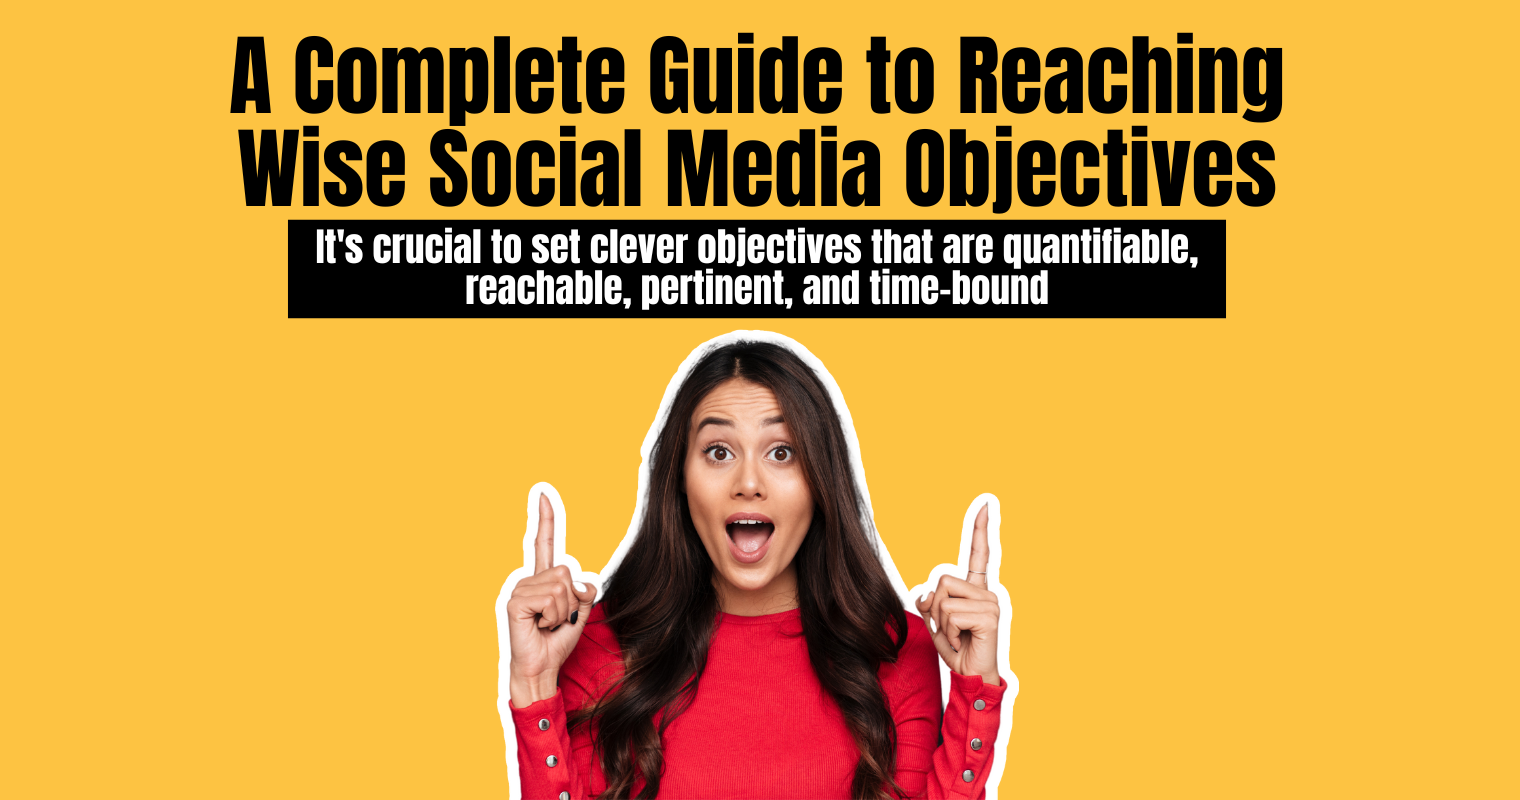 A Complete Guide to Reaching Wise Social Media Objectives